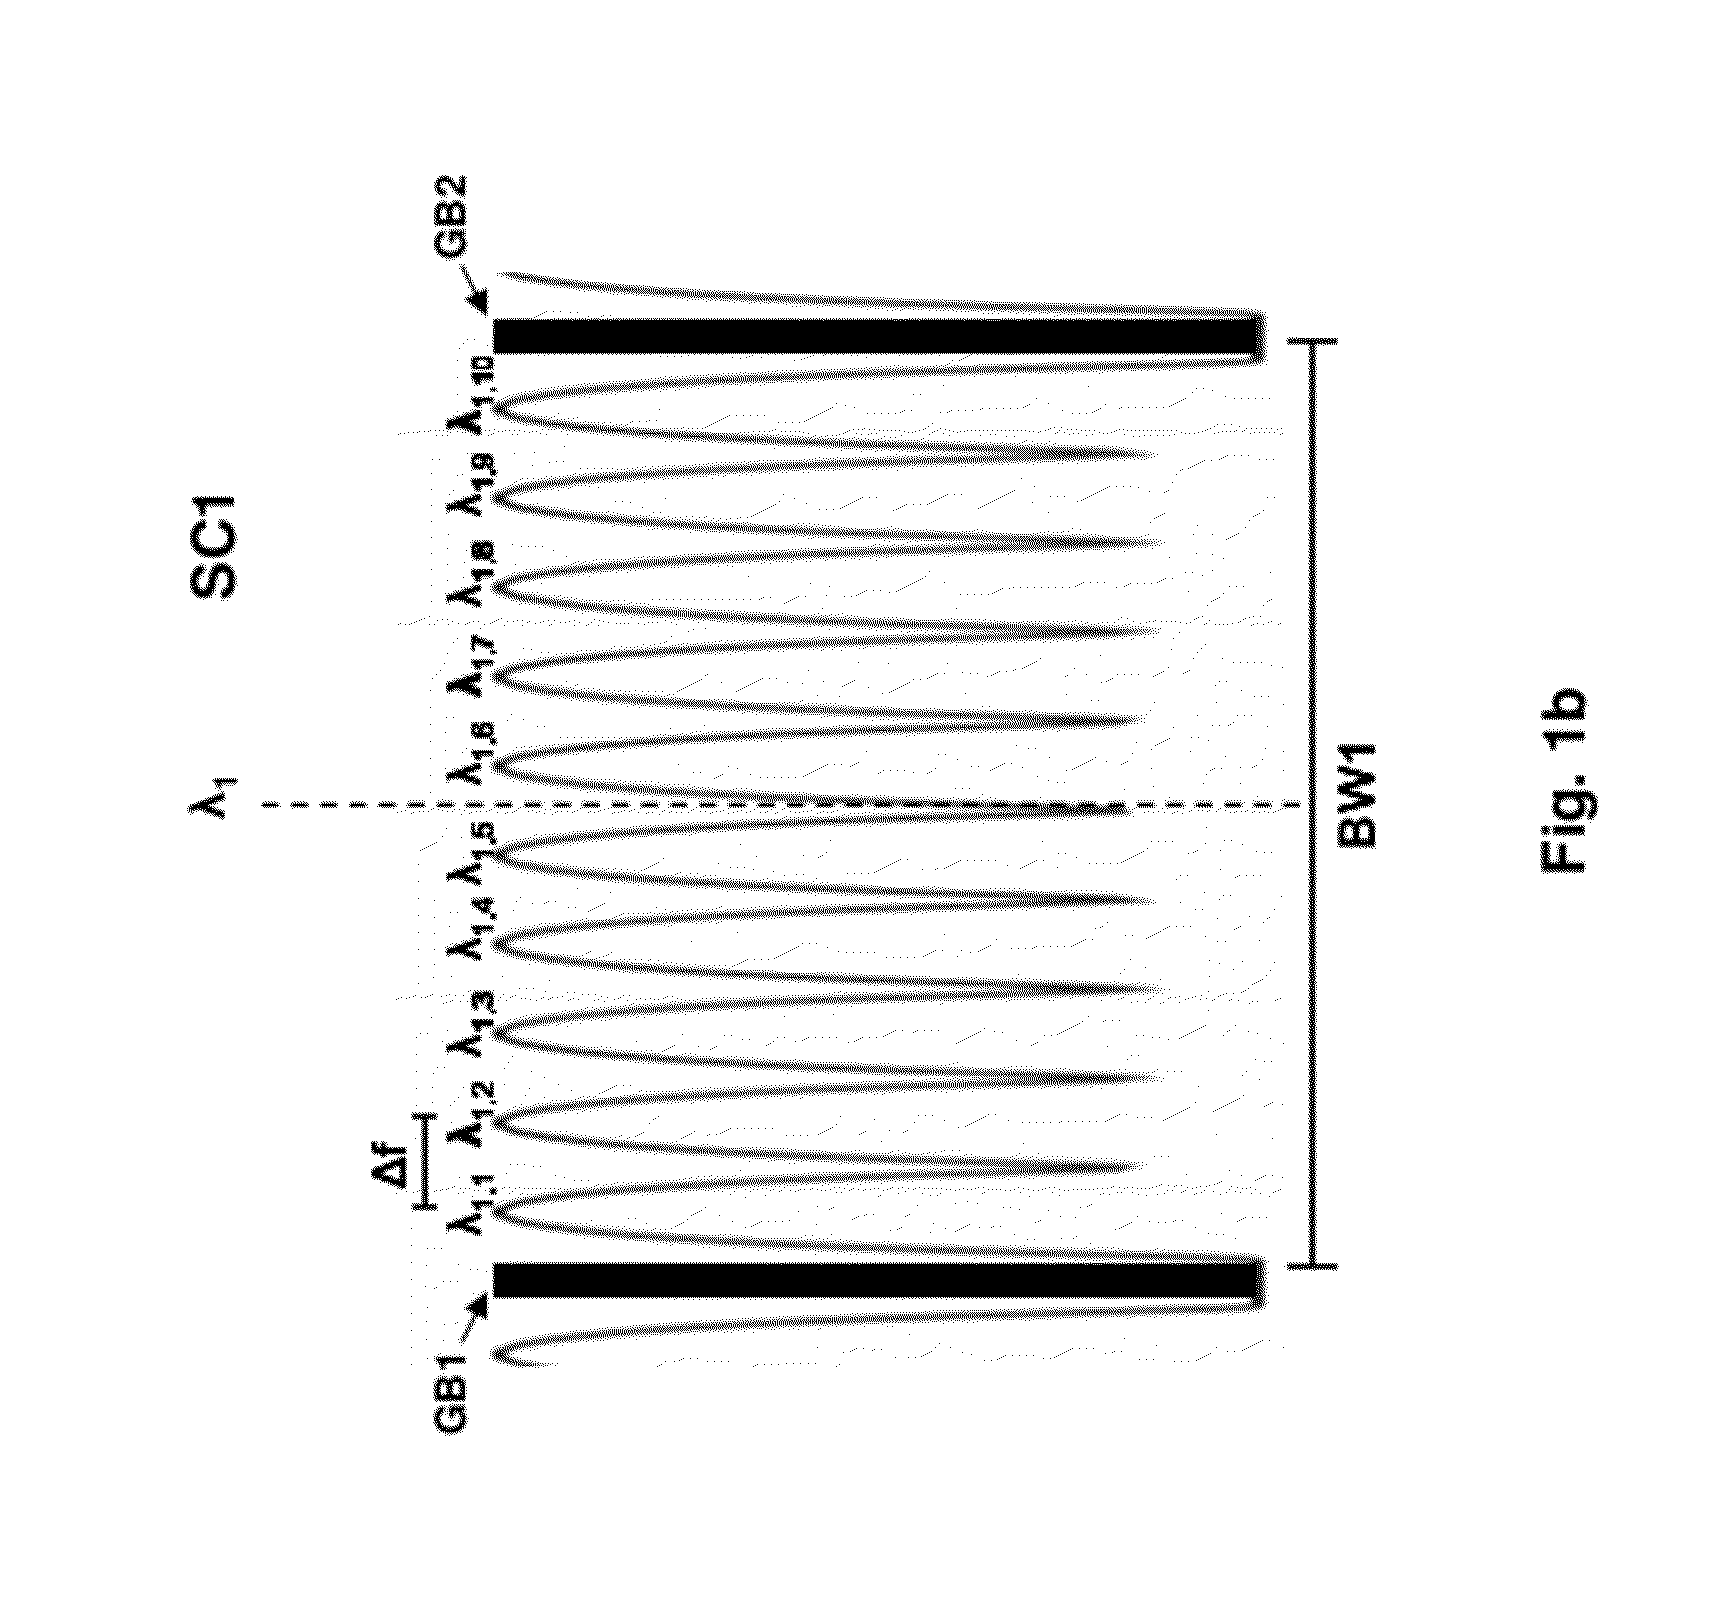 Multiplexer and Modulation Arrangements for Multi-Carrier Optical Modems